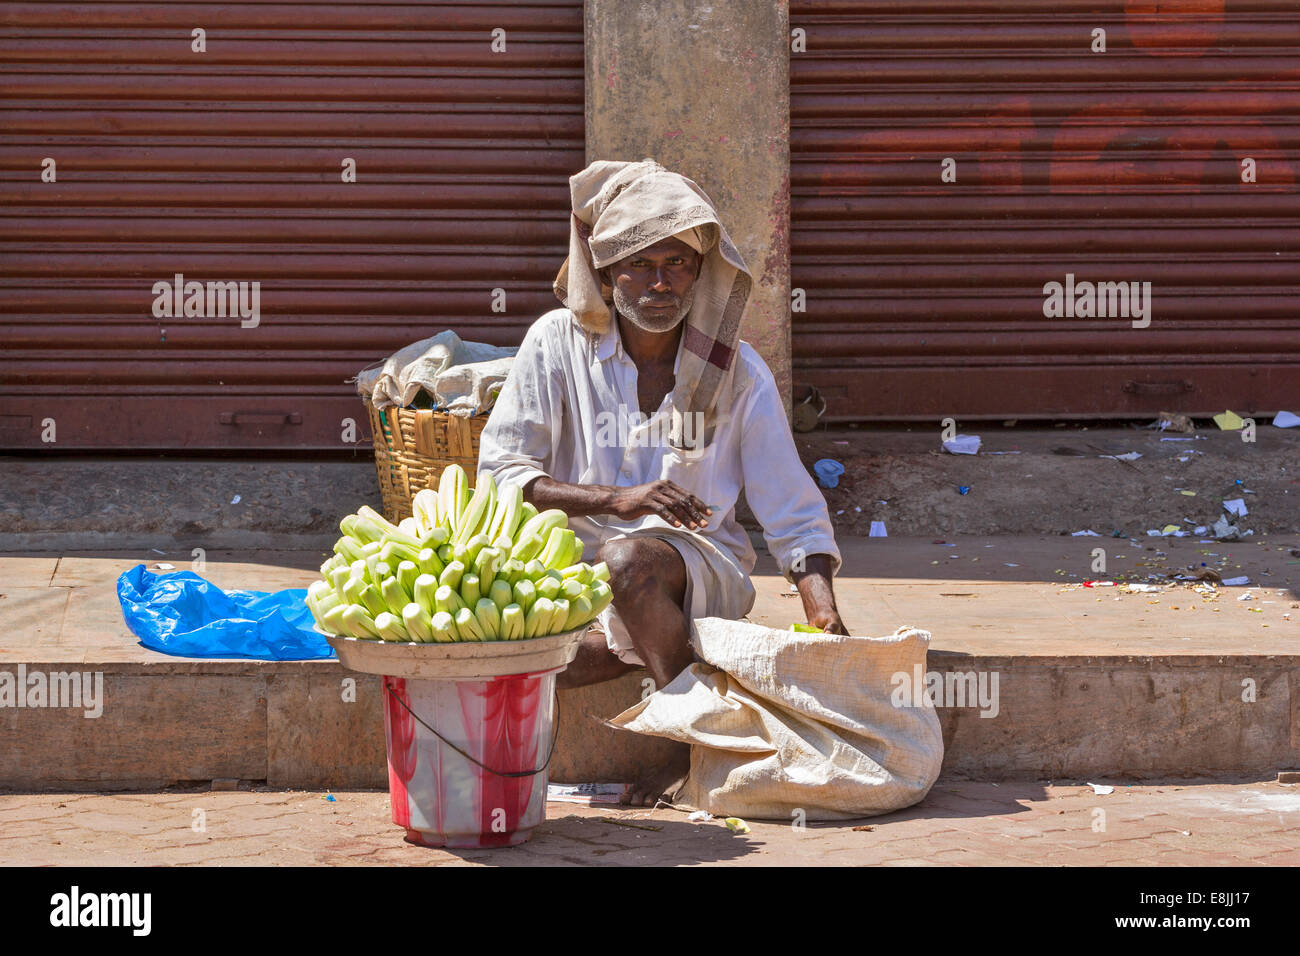 STREET SELLER INDIA  WITH CARVED CUCUMBERS FOR SALE Stock Photo